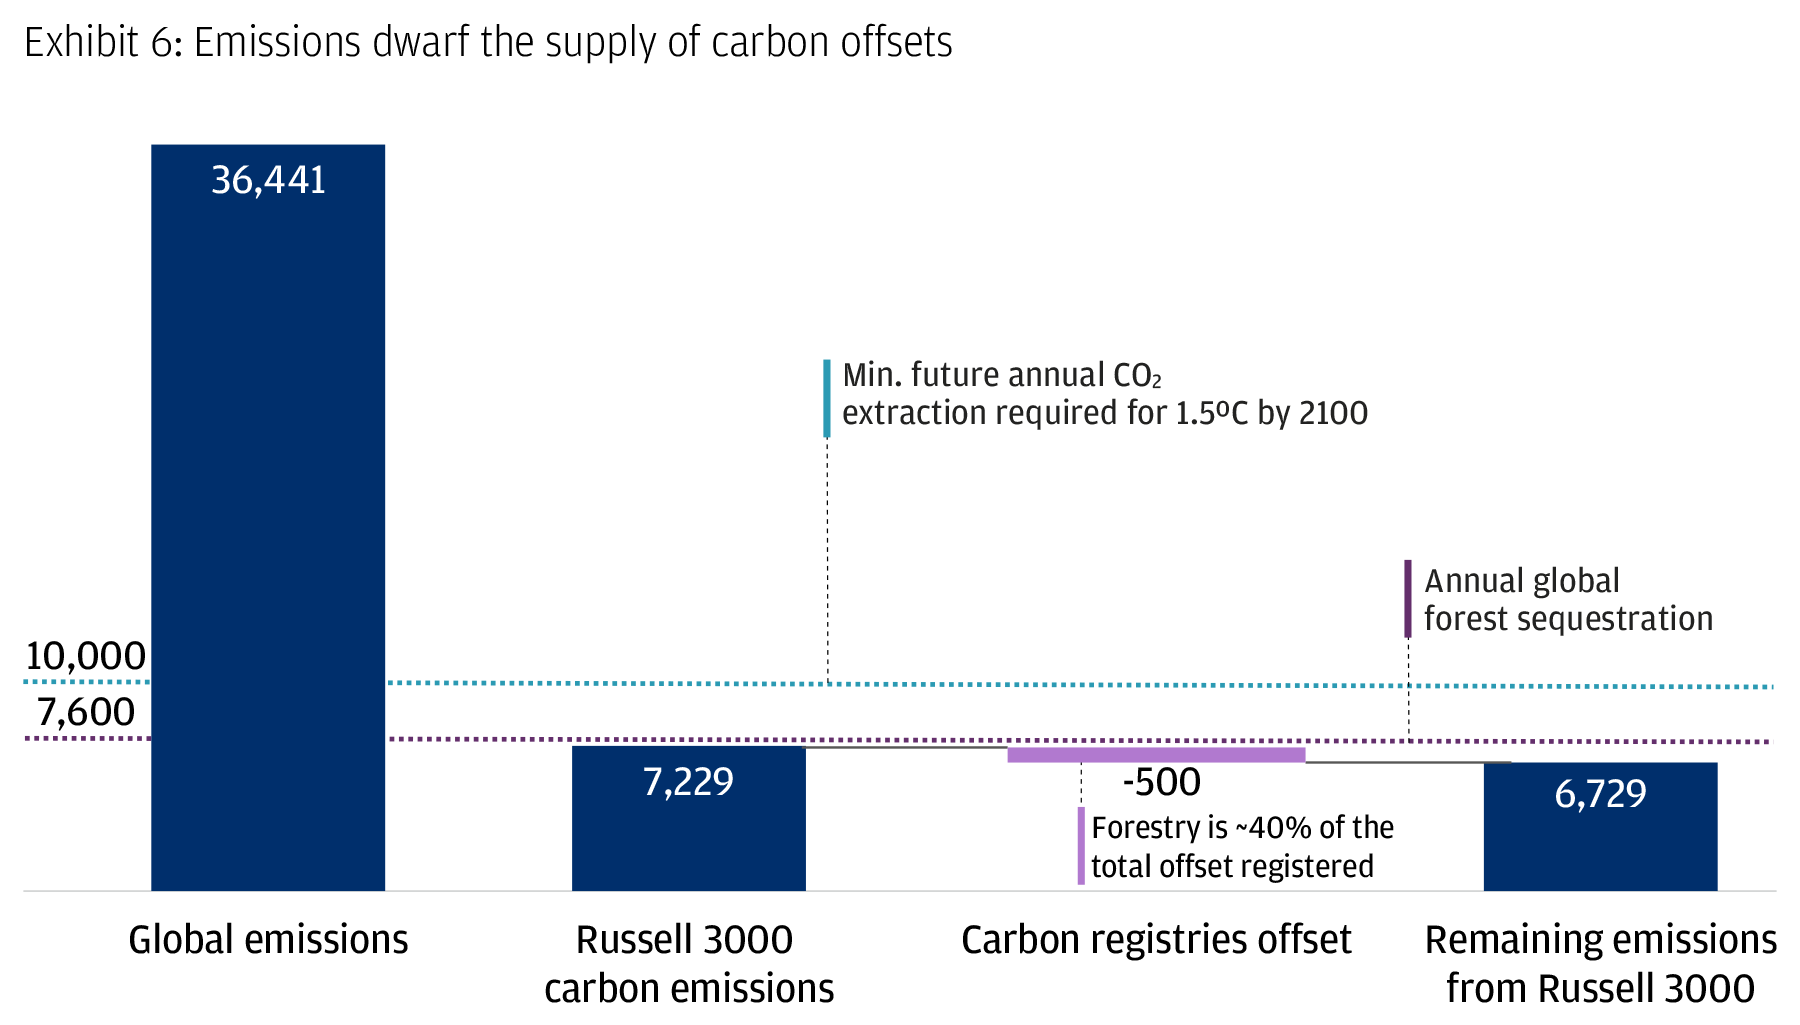 Exhibit 6: emissions dwarf the supply of carbon offsets